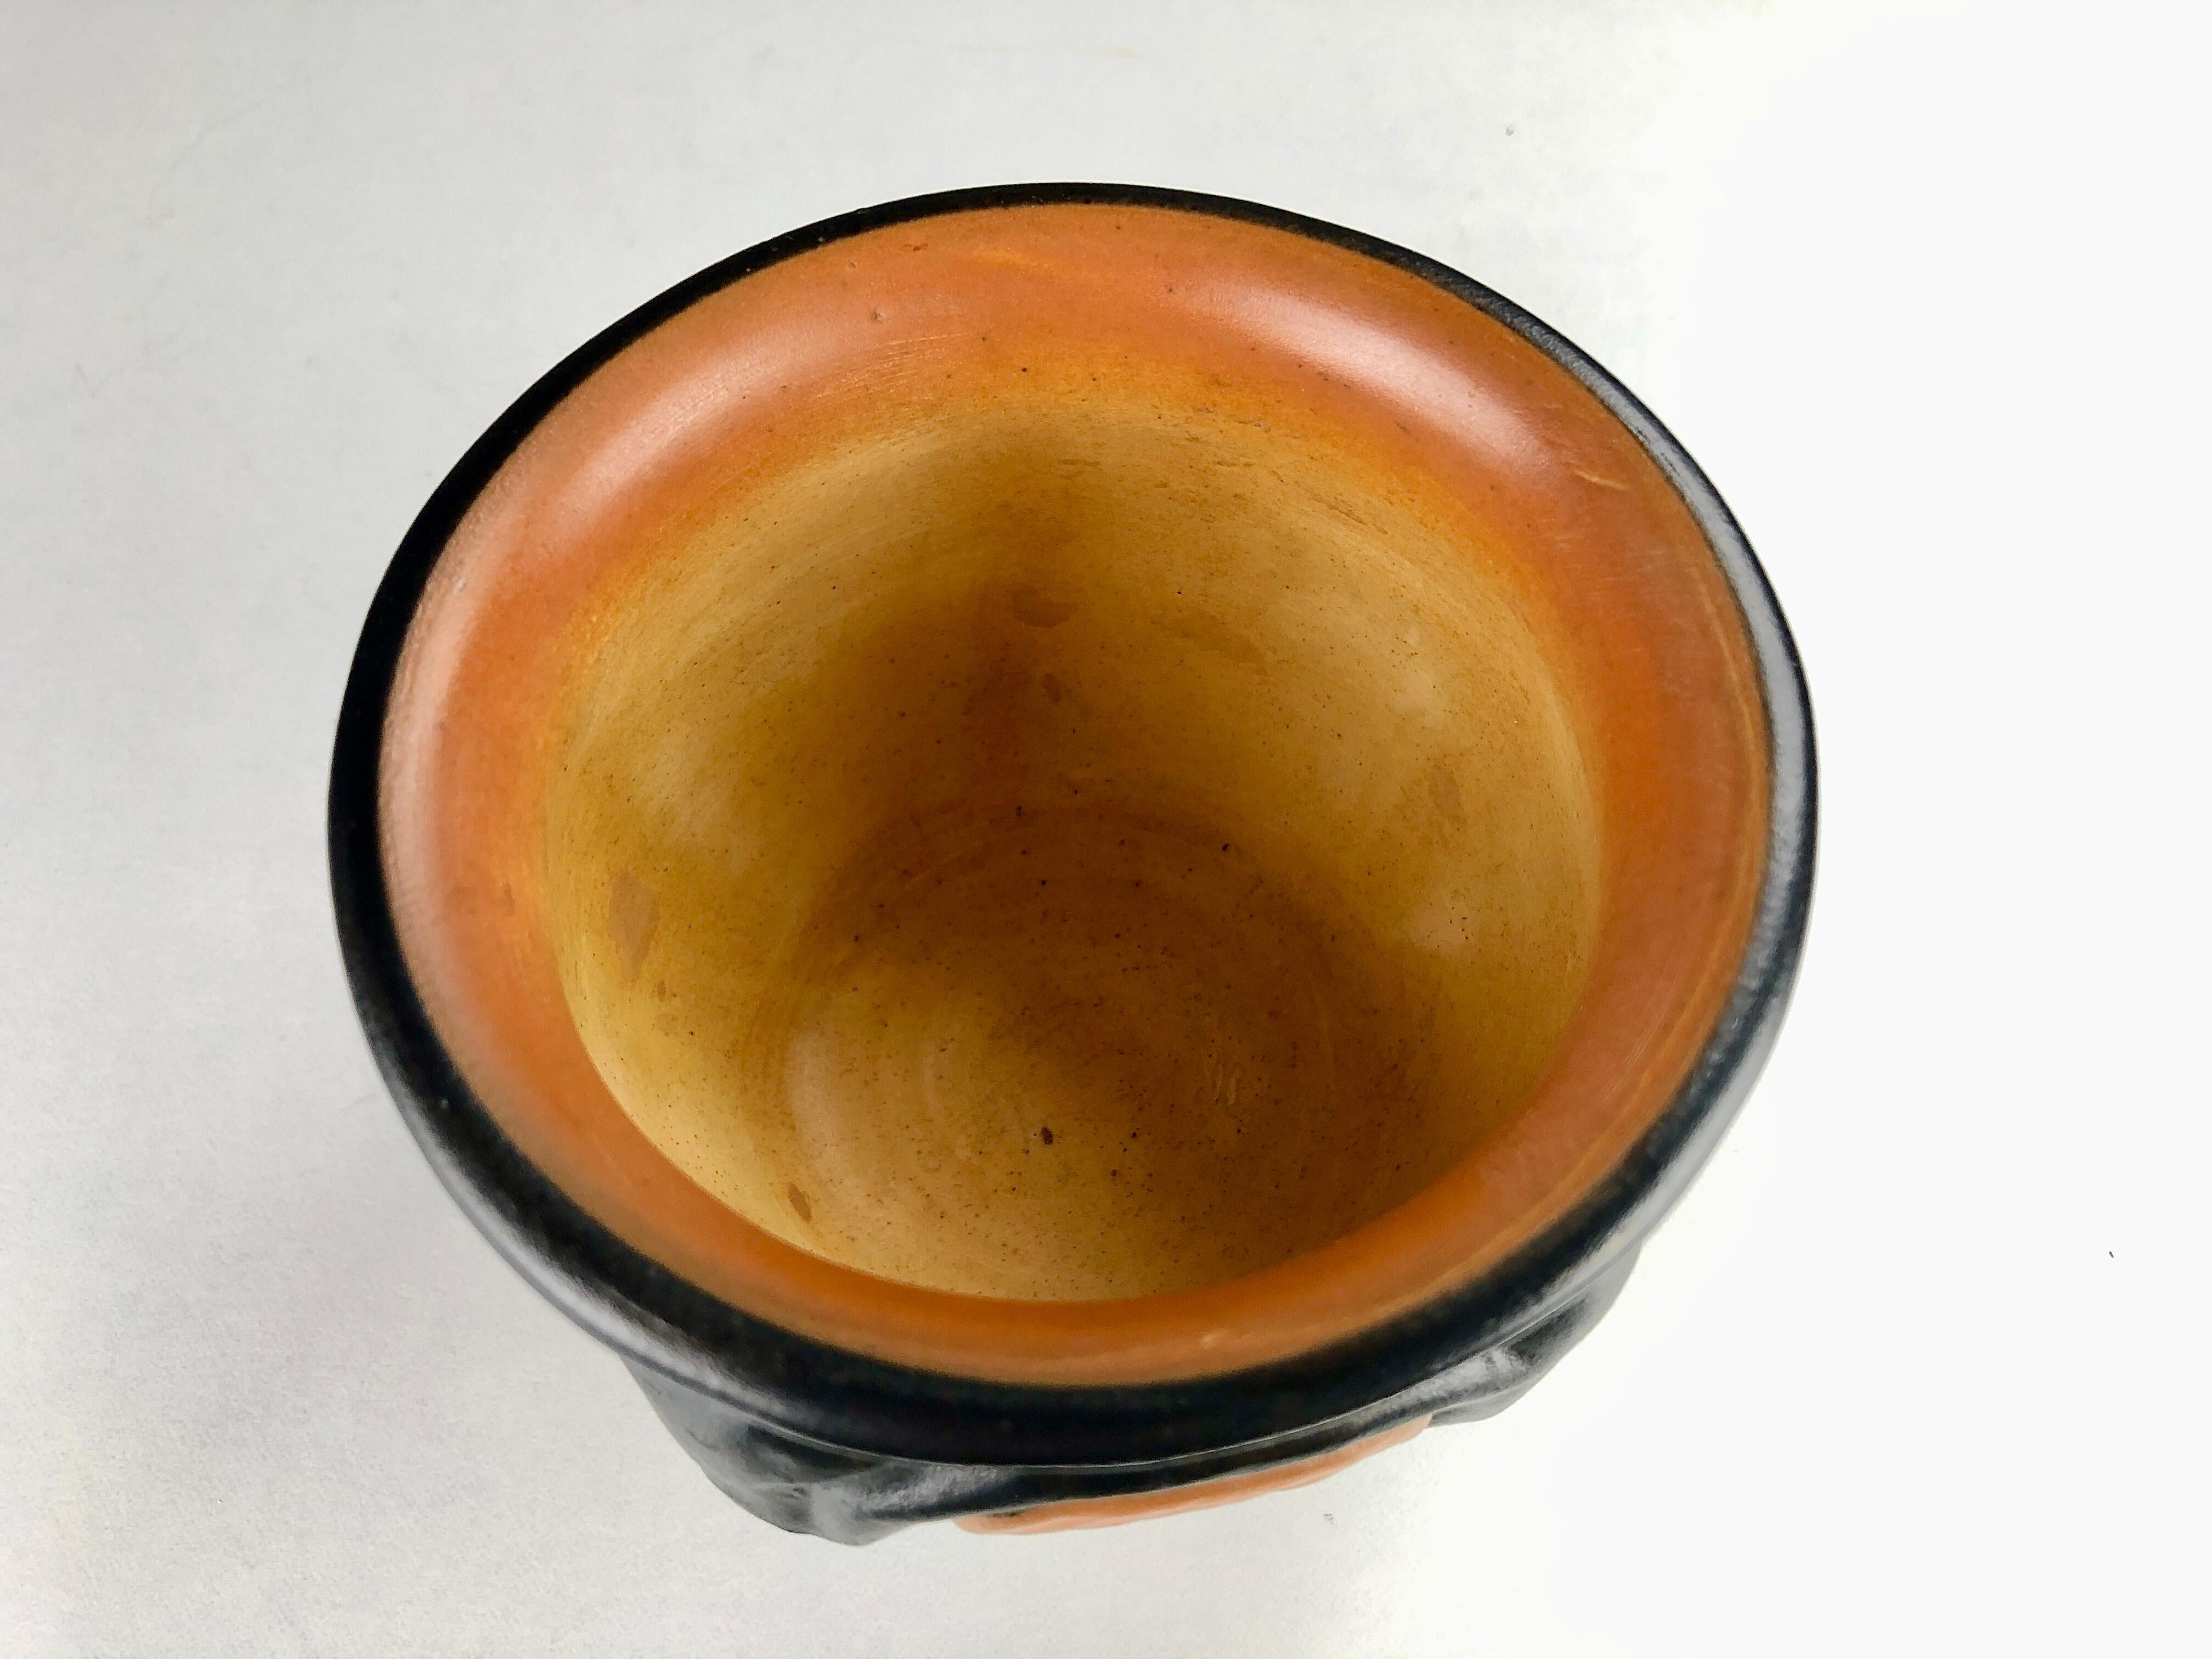 Hand-Crafted 1915 Small Danish Art Nouveau Vase or Bowl by P. Ipsens Enke For Sale